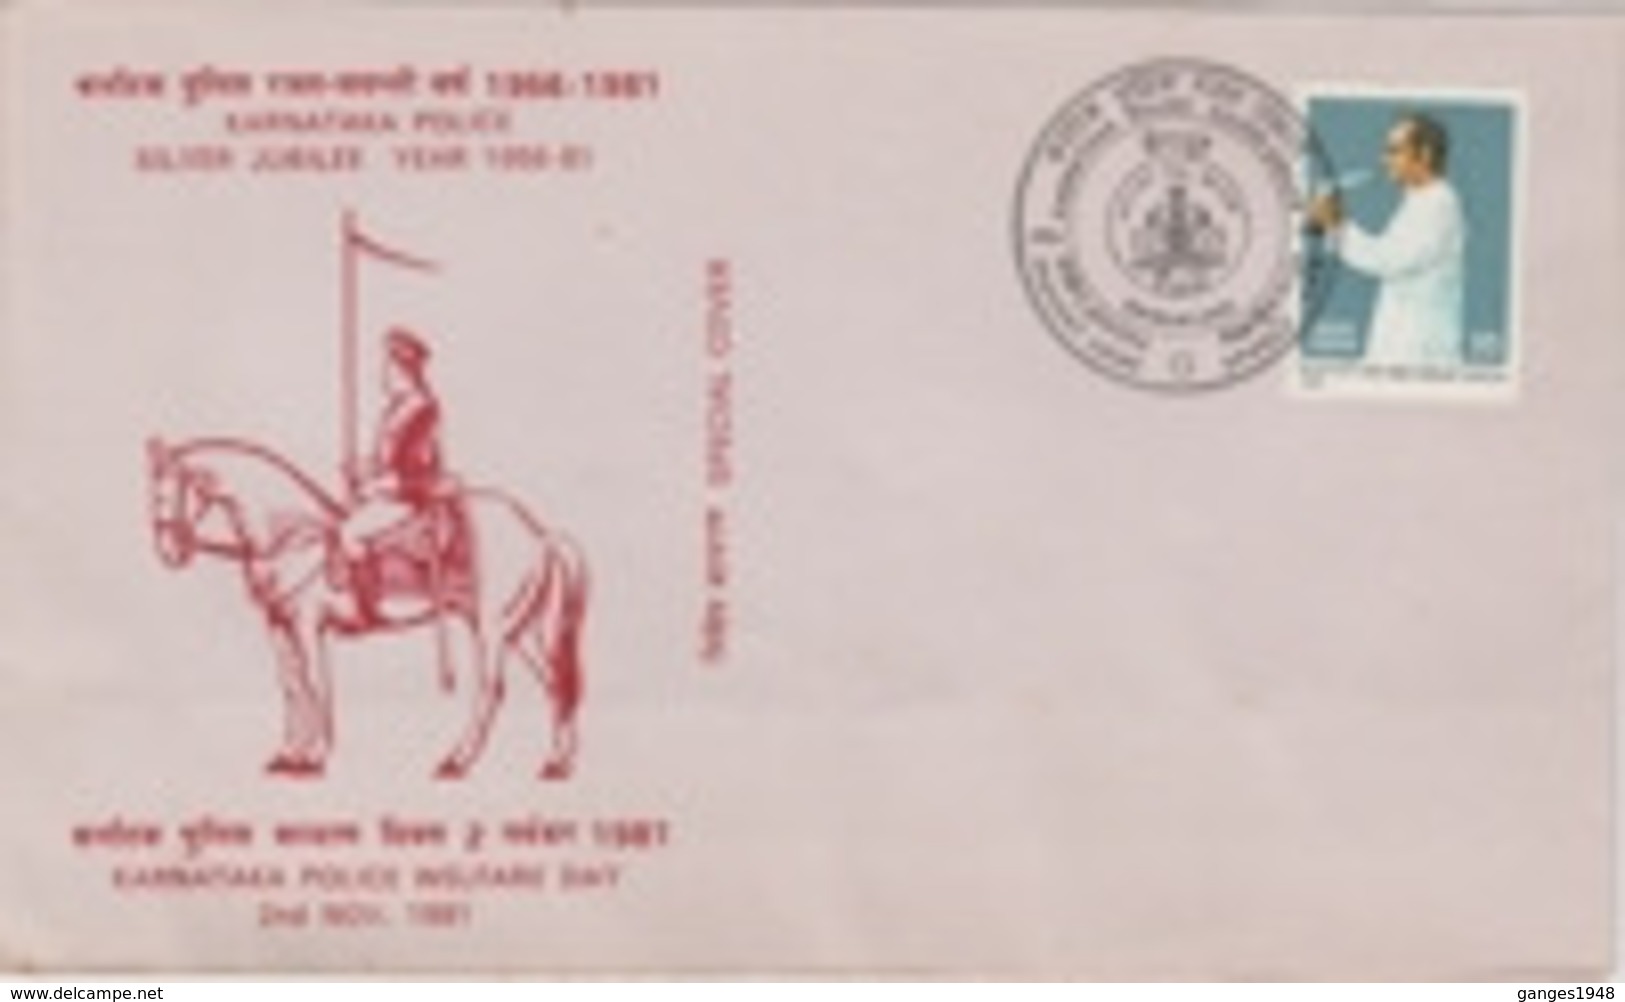 India  1981  Karnataka Police  Silver Jubilee Year  Bangalore  Special Cover  # 21898  D Inde - Police - Gendarmerie